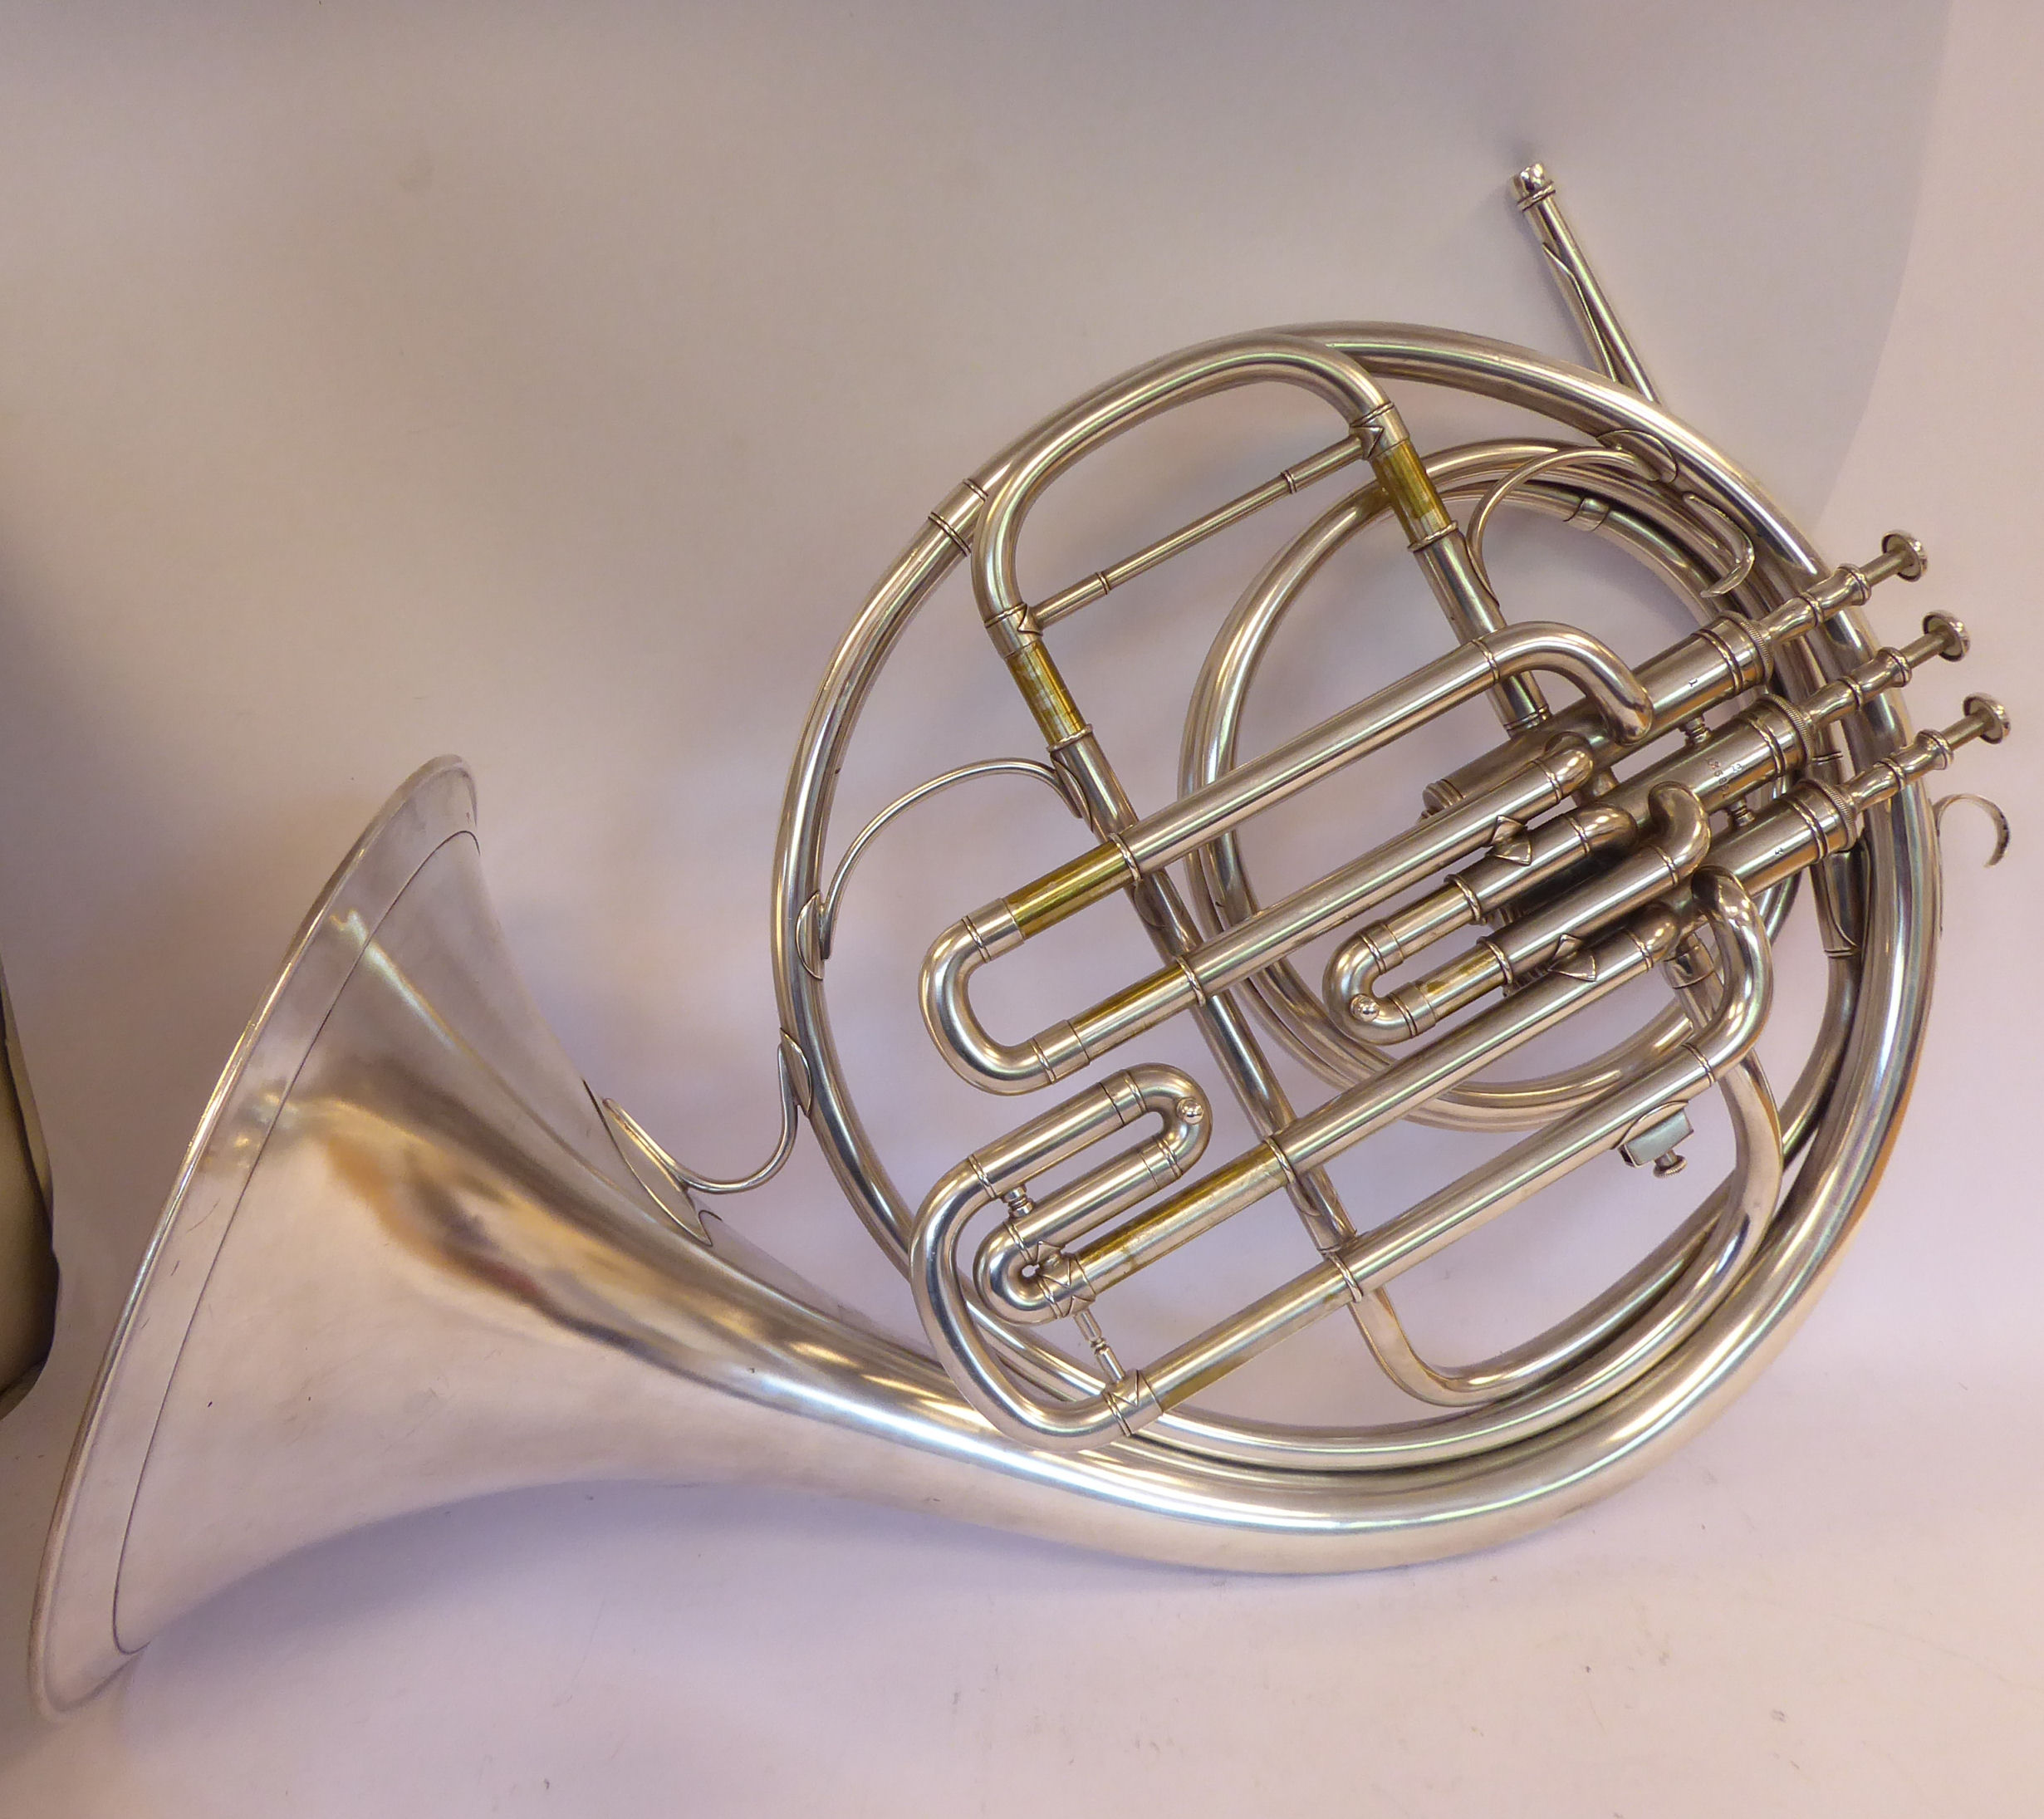 A B&H piston French horn, in a fitted, fabric lined, - Image 2 of 6